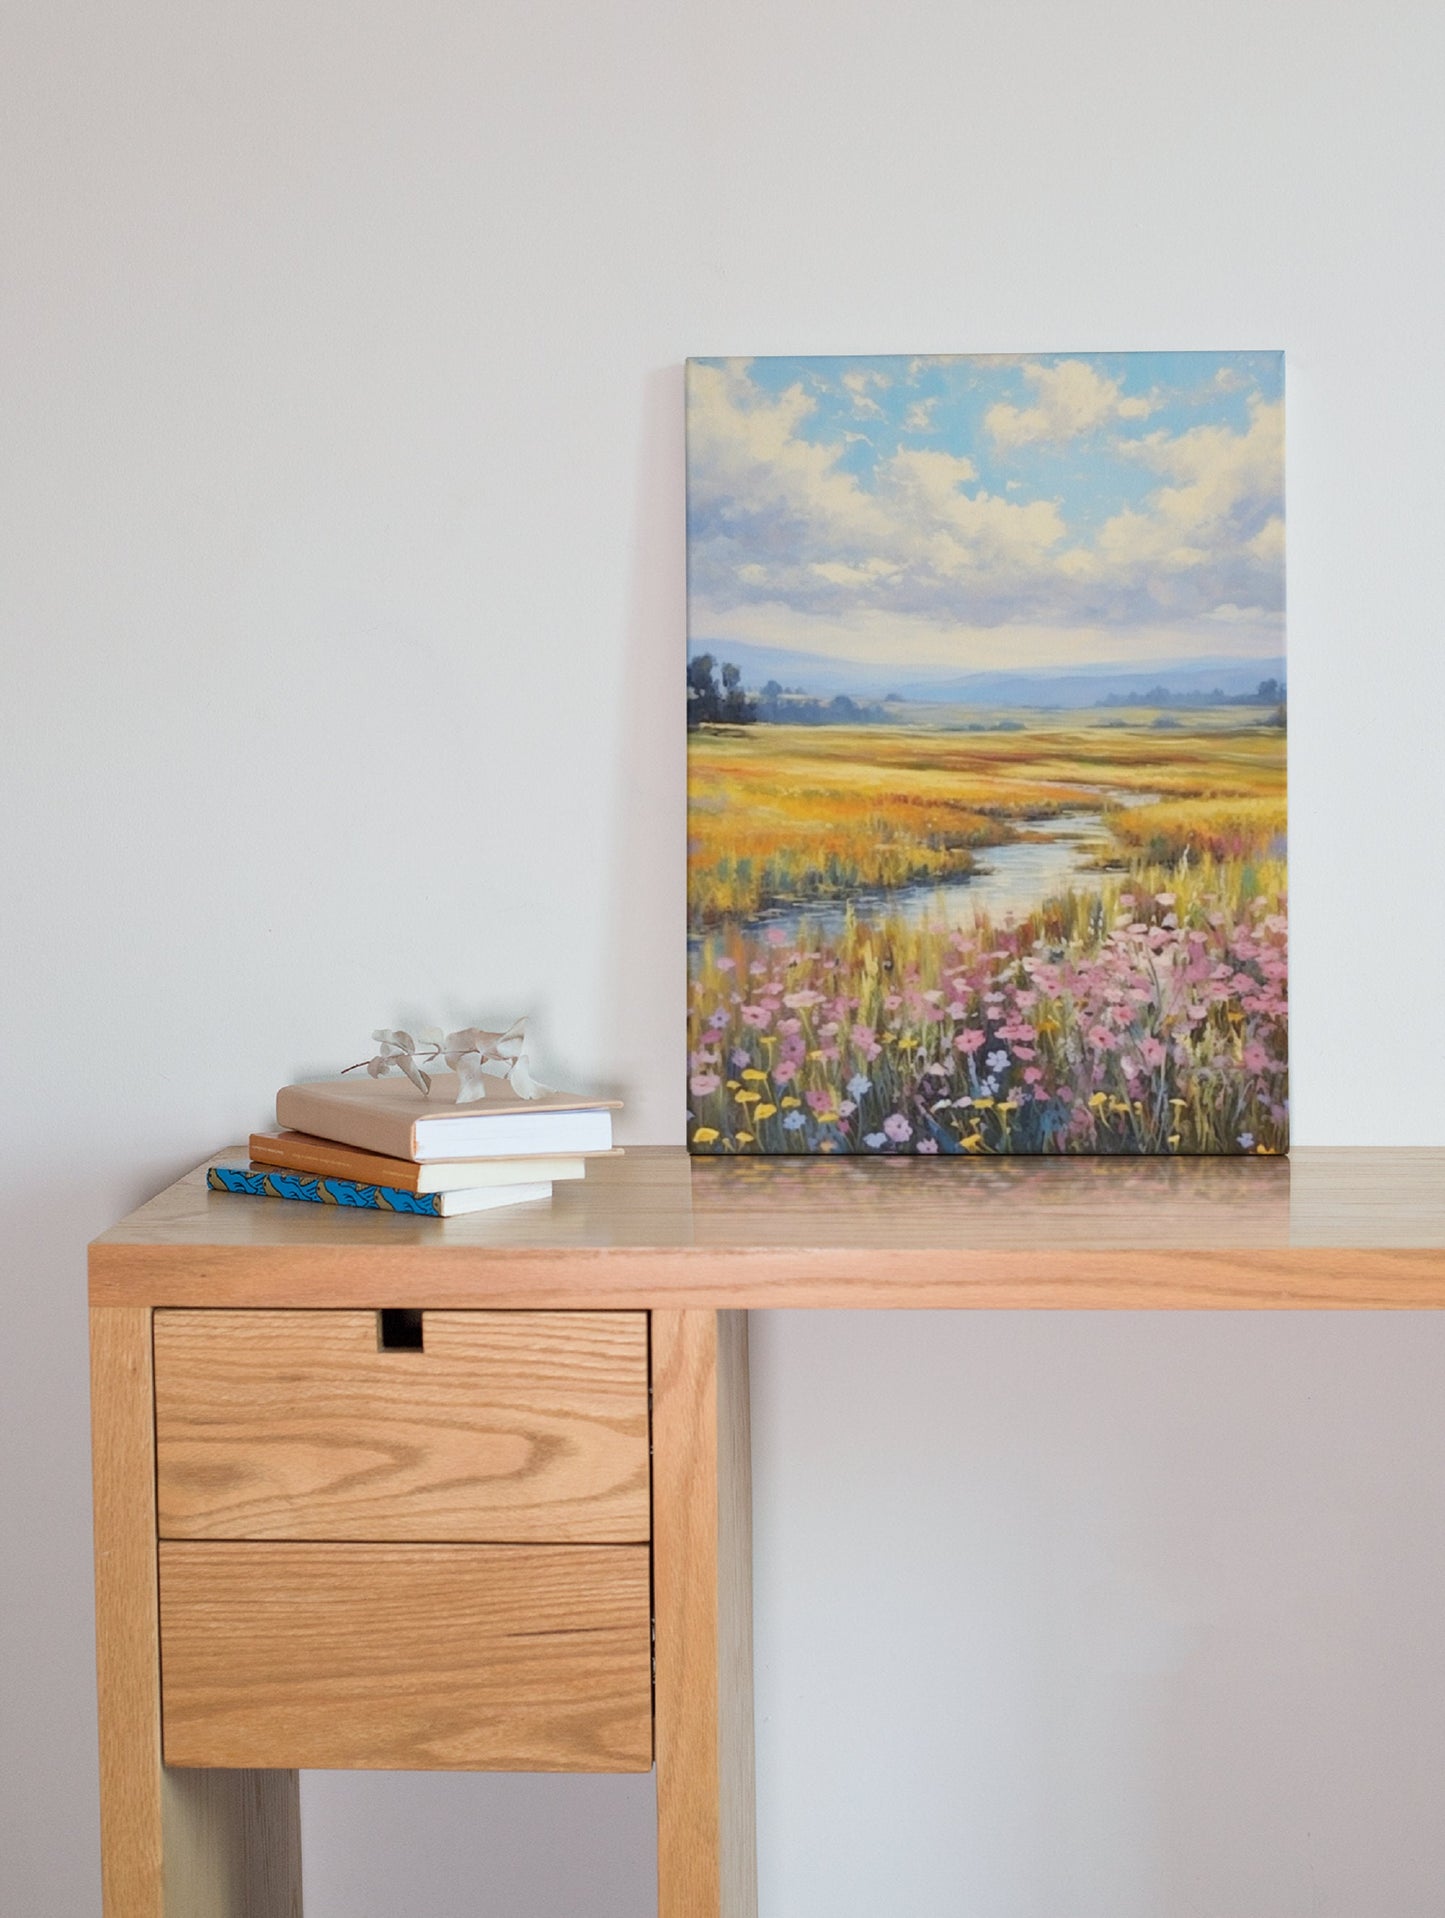 Modern and Simple Wildflower Canvas Art in a Frame - Perfect for Flower and Farmhouse Wall Decor